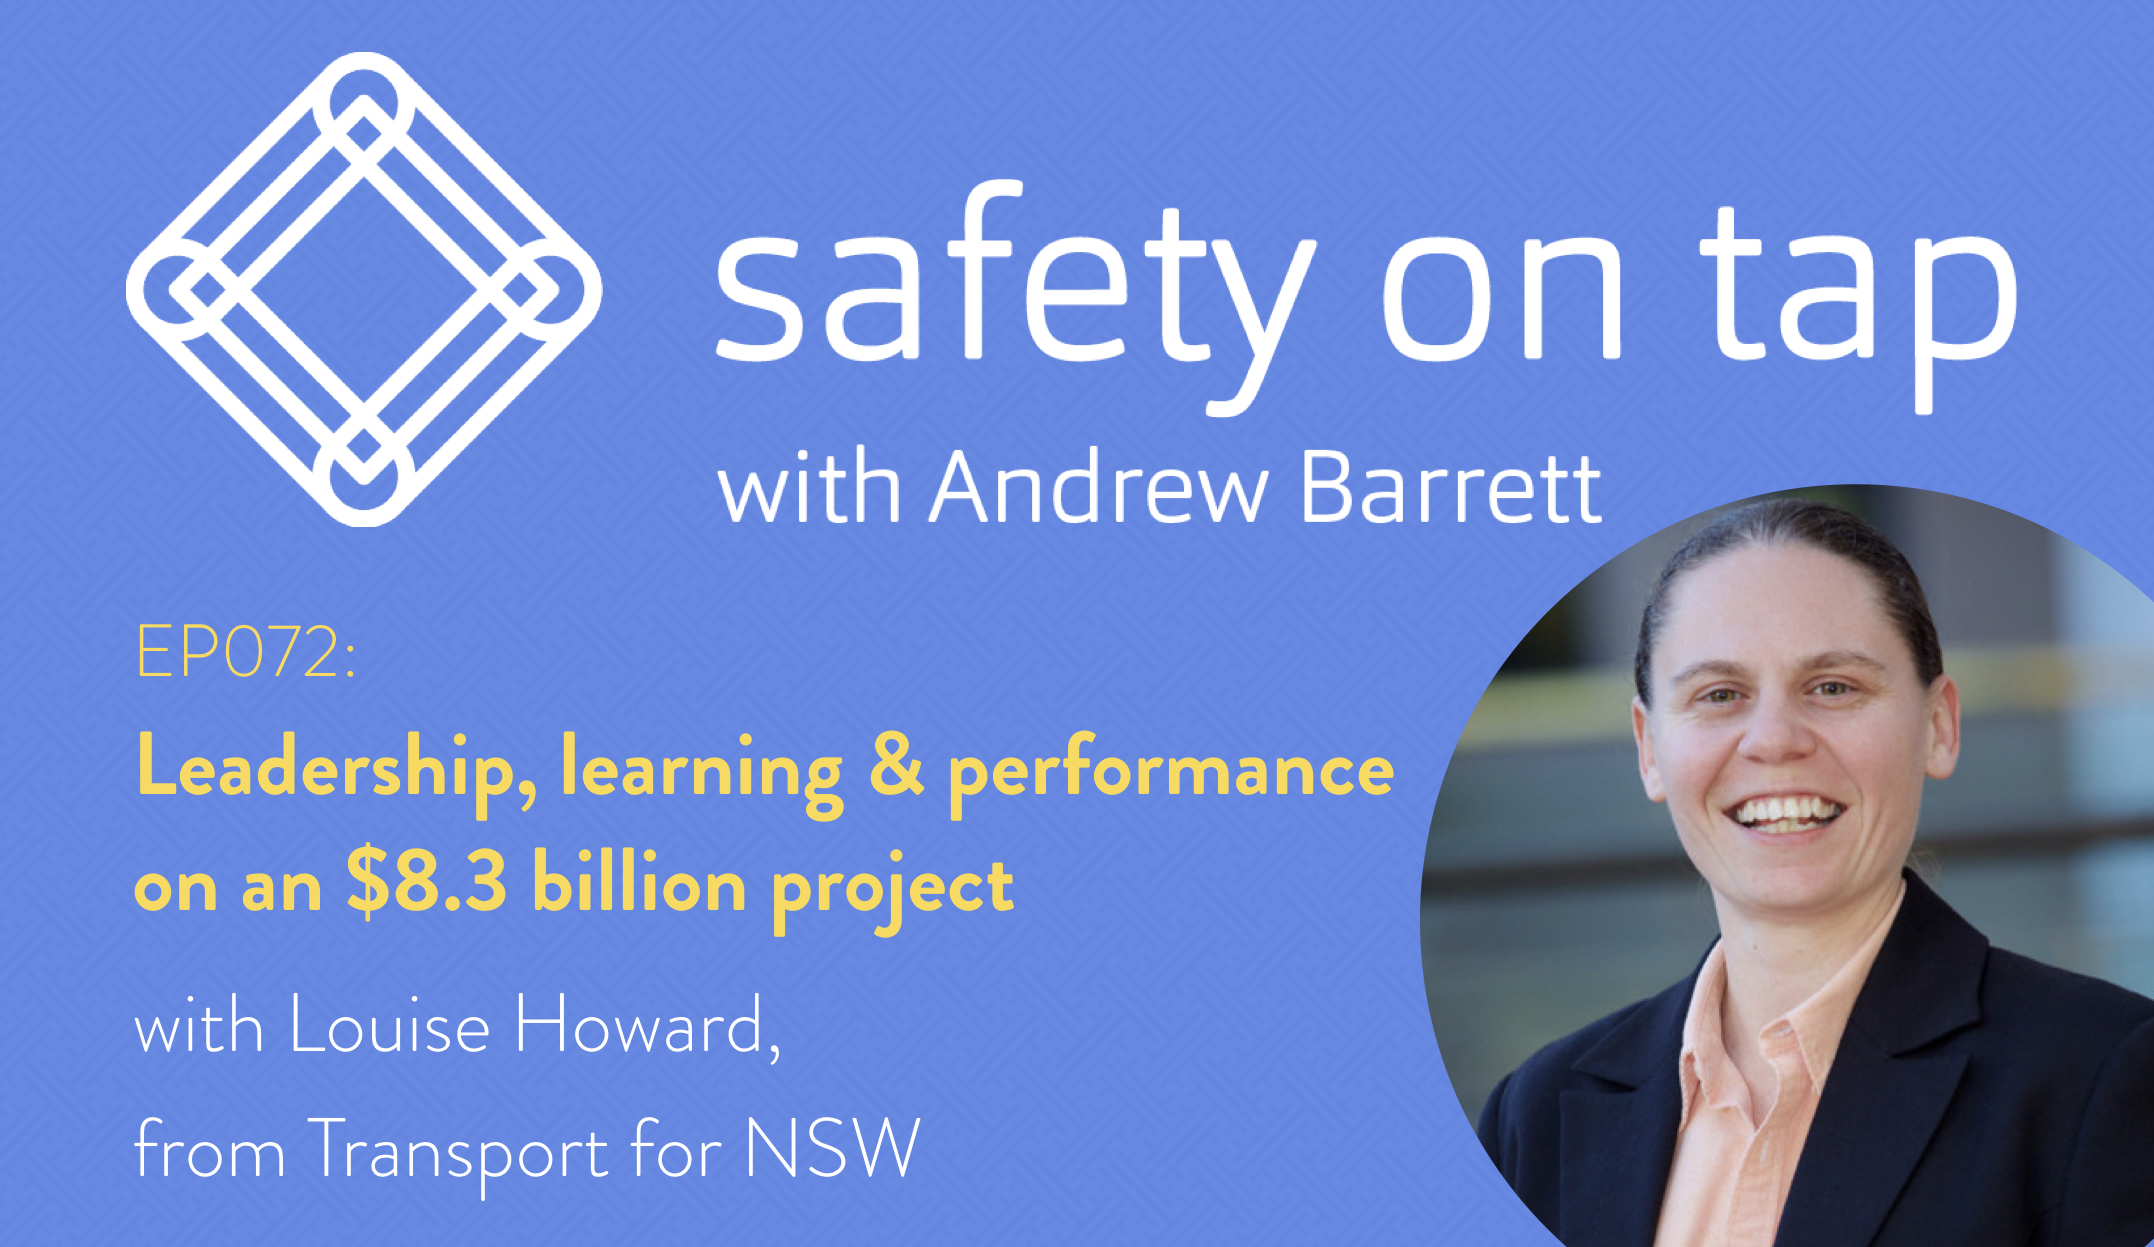 Ep072: Leadership, learning, & performance on a $8.3 billion dollar project, with Louise Howard from Transport for NSW